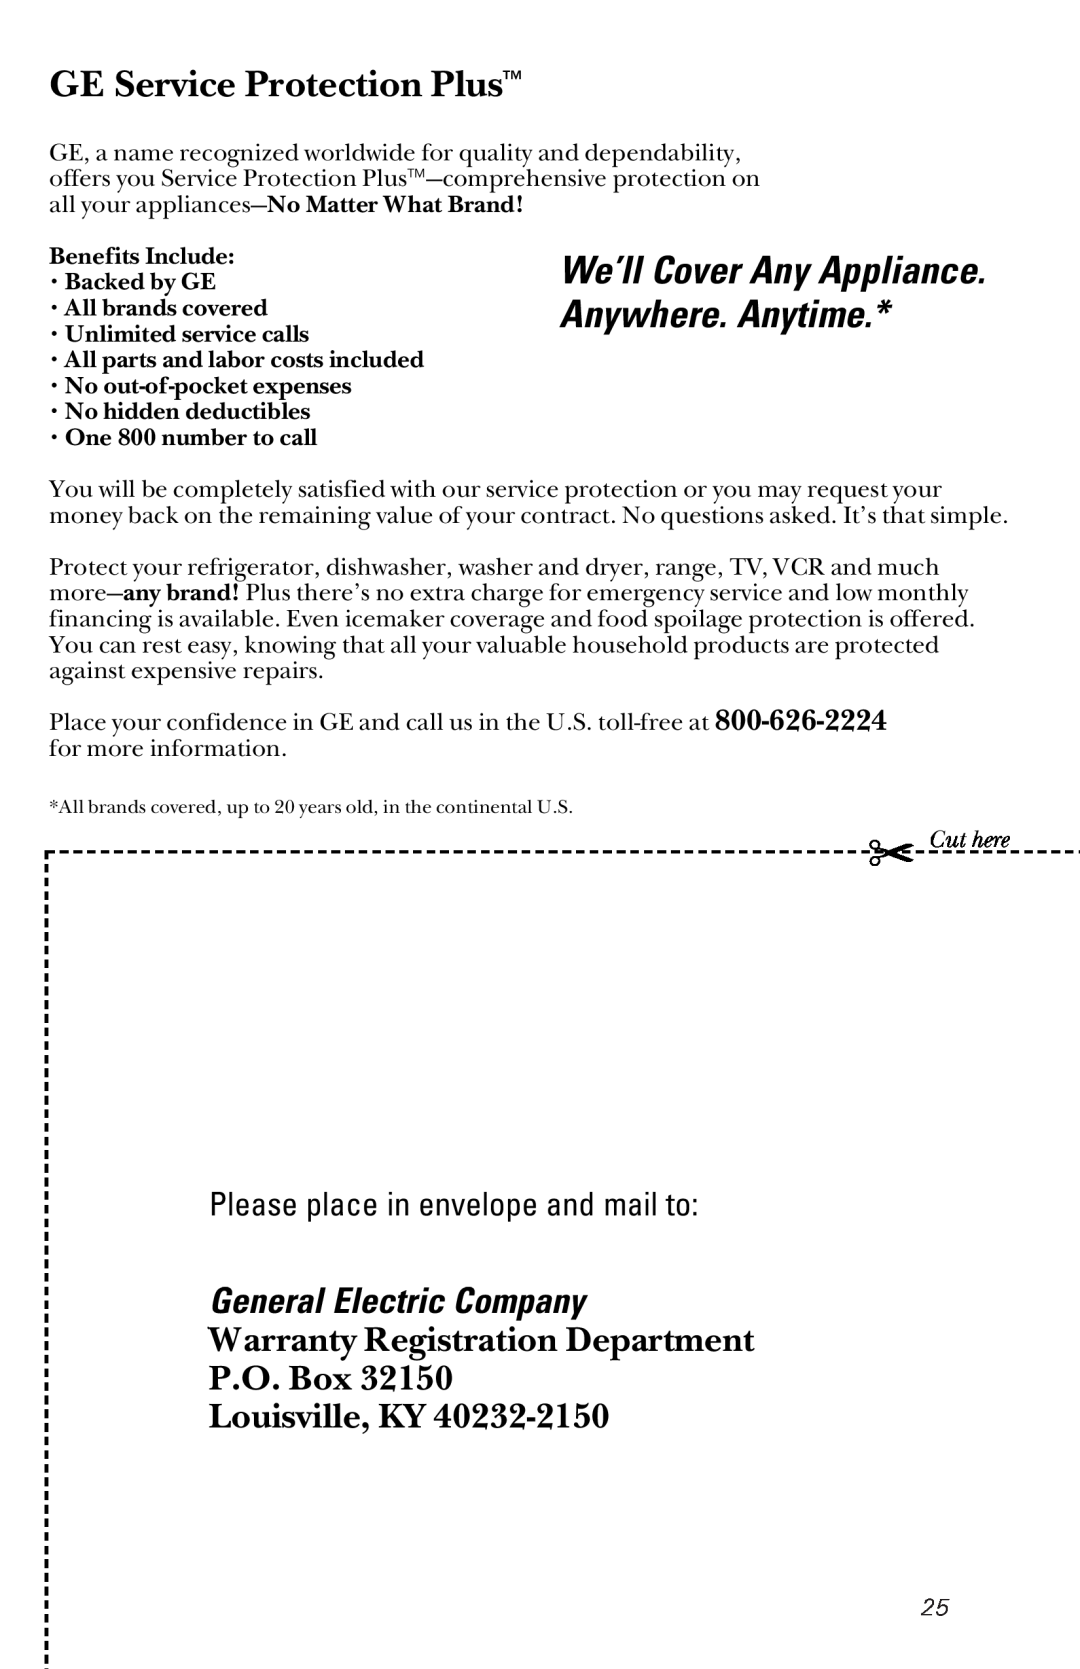 GE GSD2300 Cut here, GE Service Protection Plus, We’ll Cover Any Appliance. Anywhere. Anytime, General Electric Company 